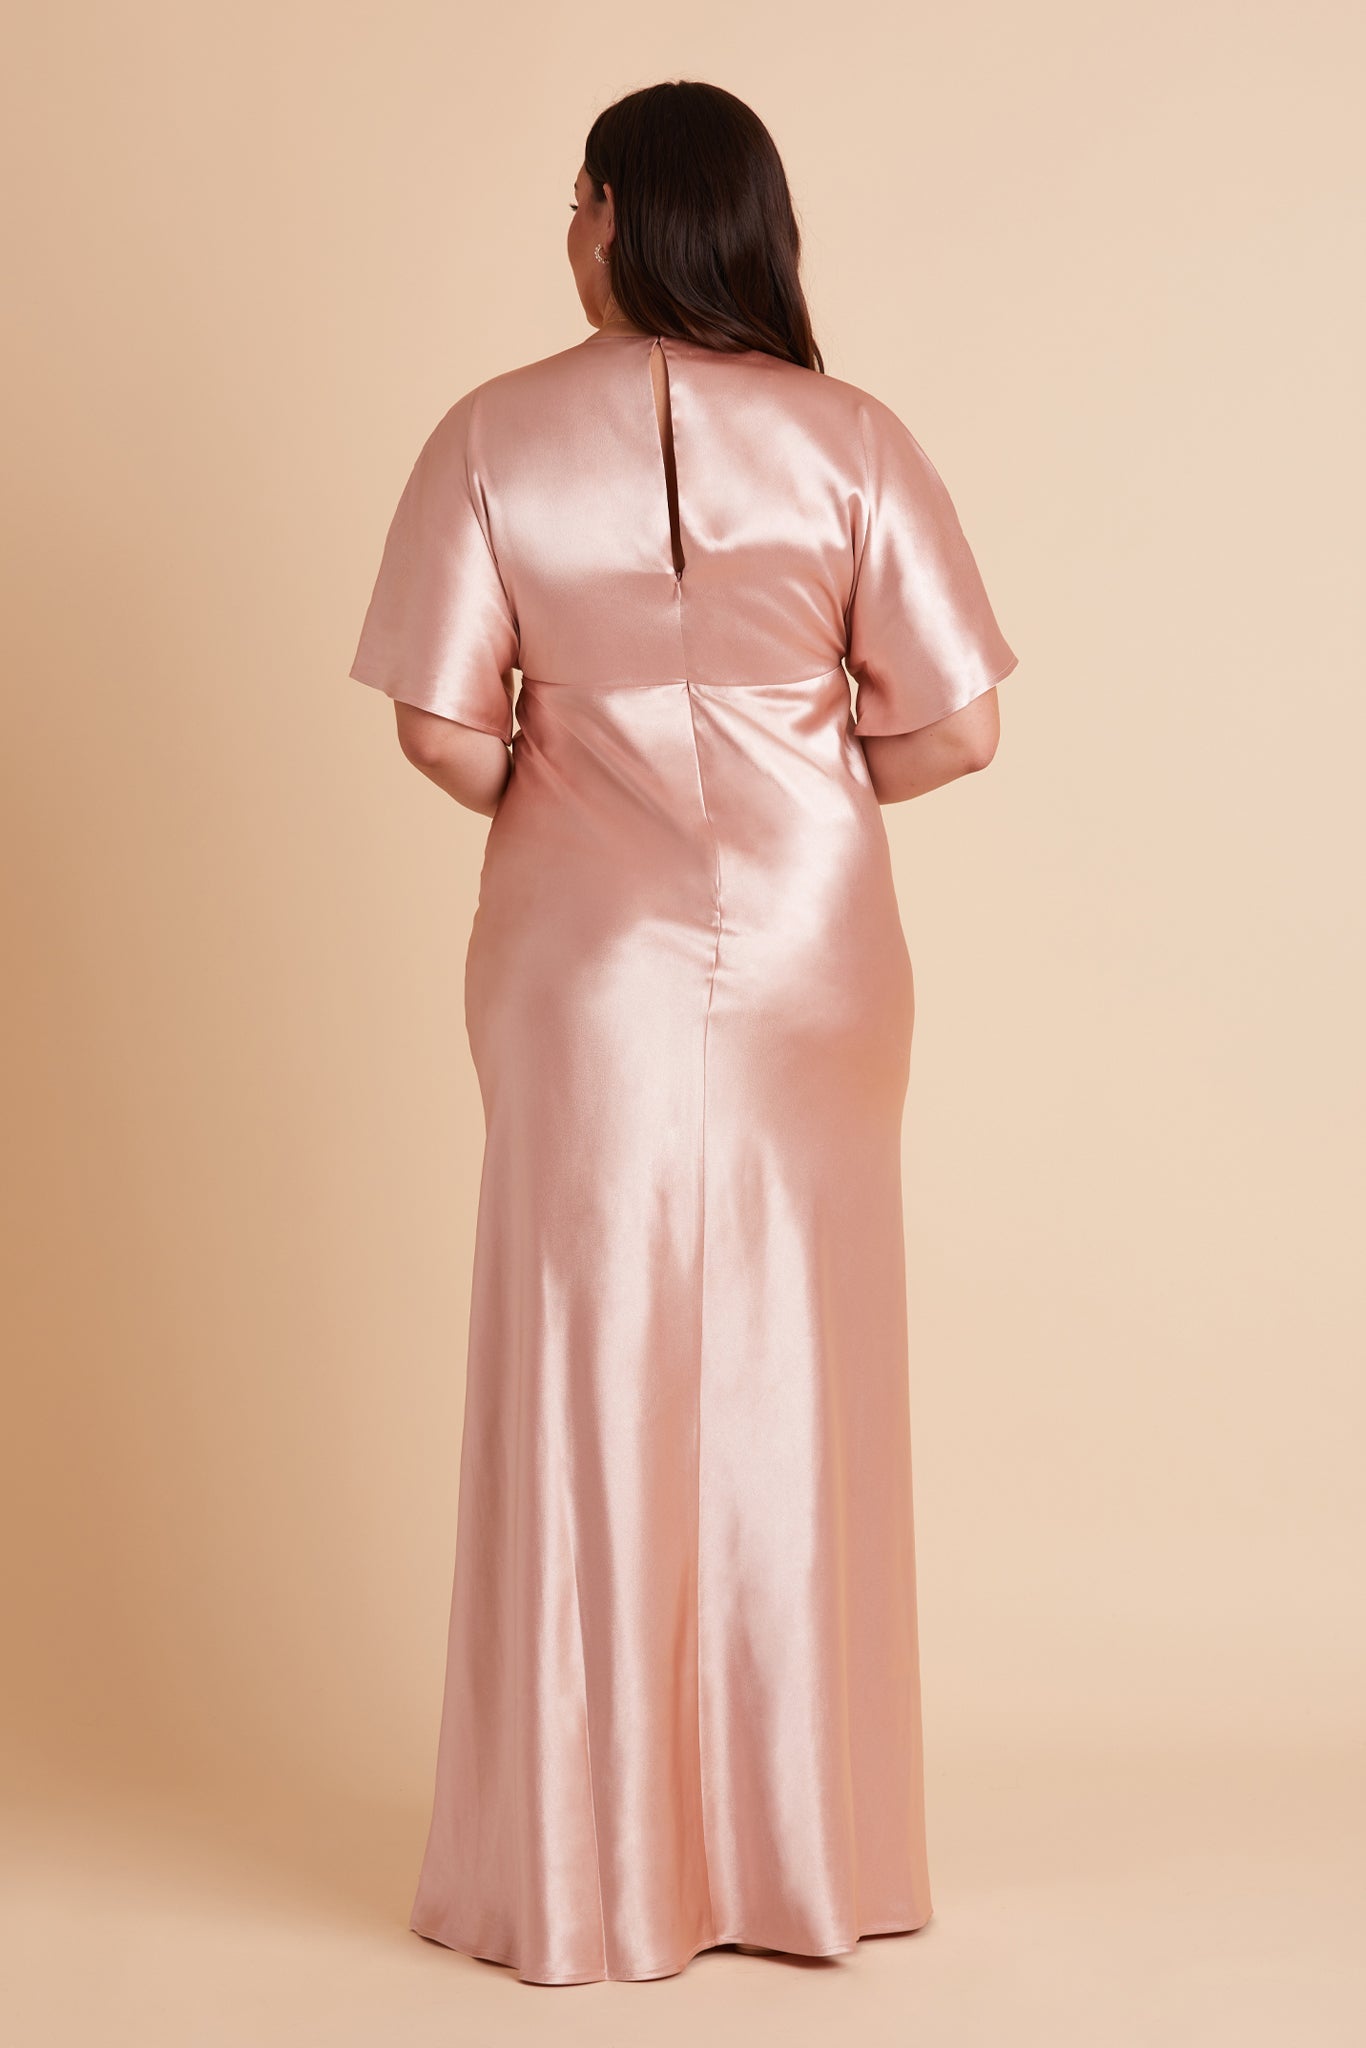 Jesse plus size bridesmaid dress in rose gold satin by Birdy Grey, back view